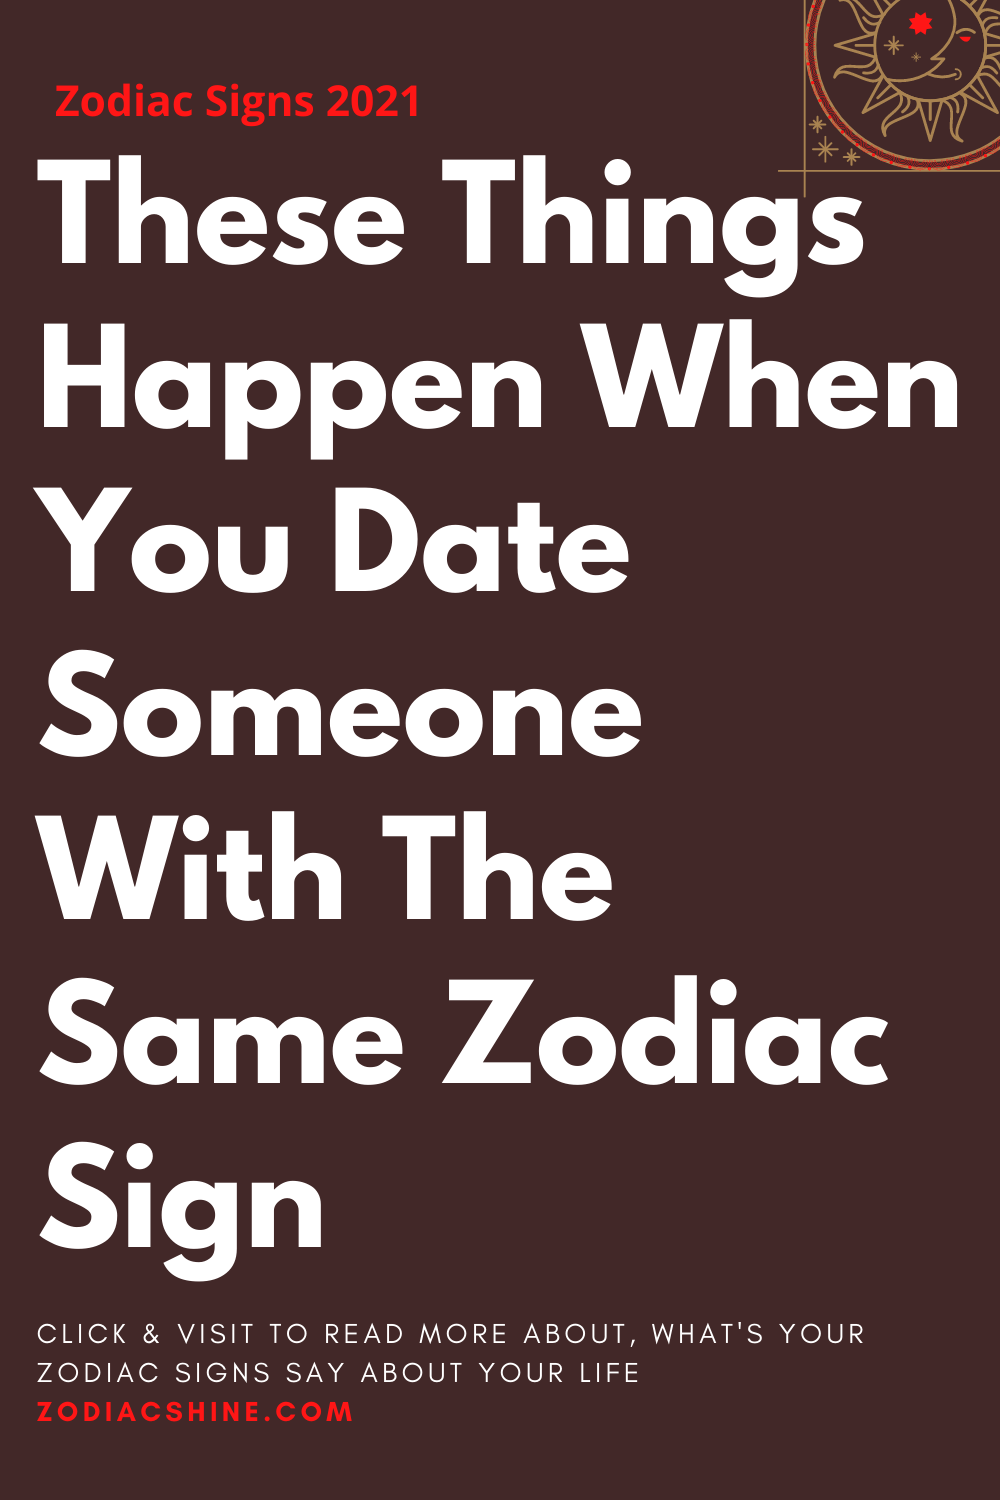 These Things Happen When You Date Someone With The Same Zodiac Sign